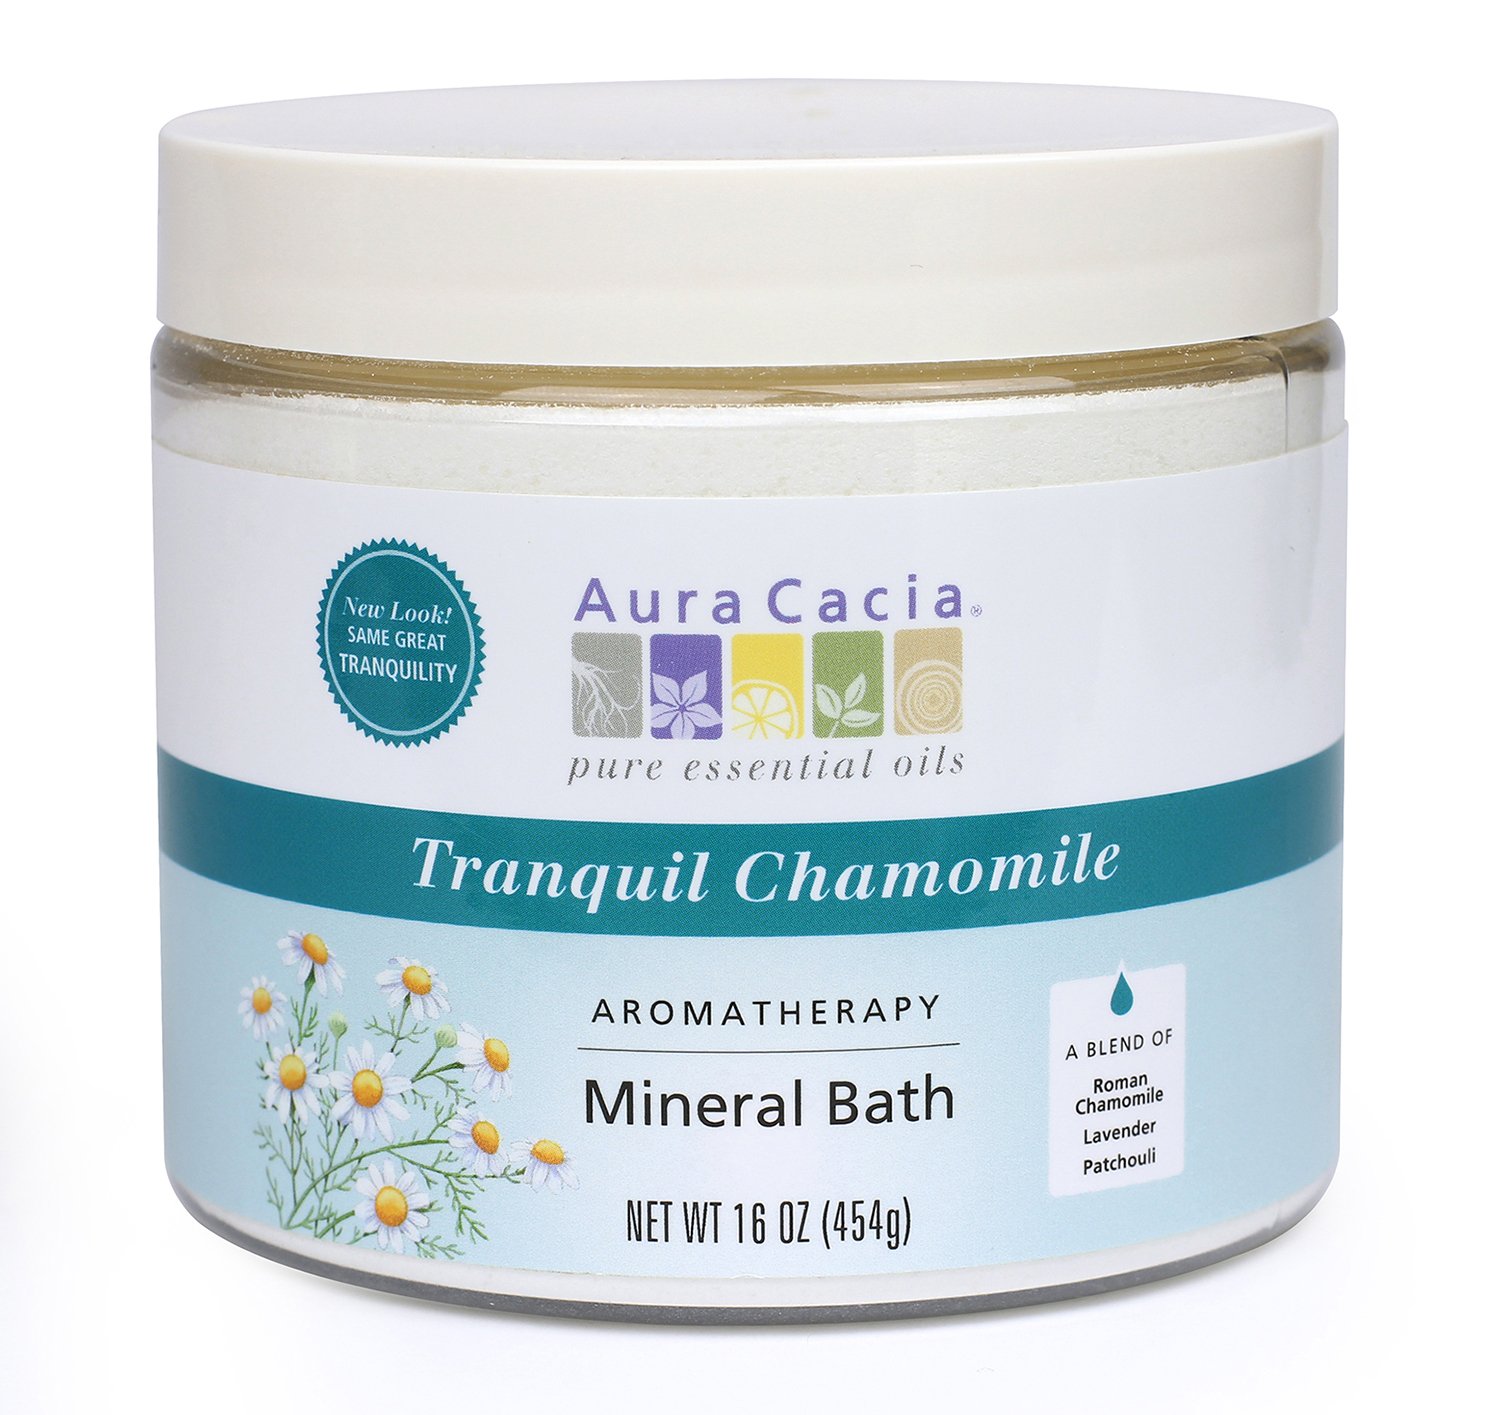 Aura Cacia Aromatherapy Mineral Bath, Tranquil Chamomile, 16 ounce jar (Pack of 2)